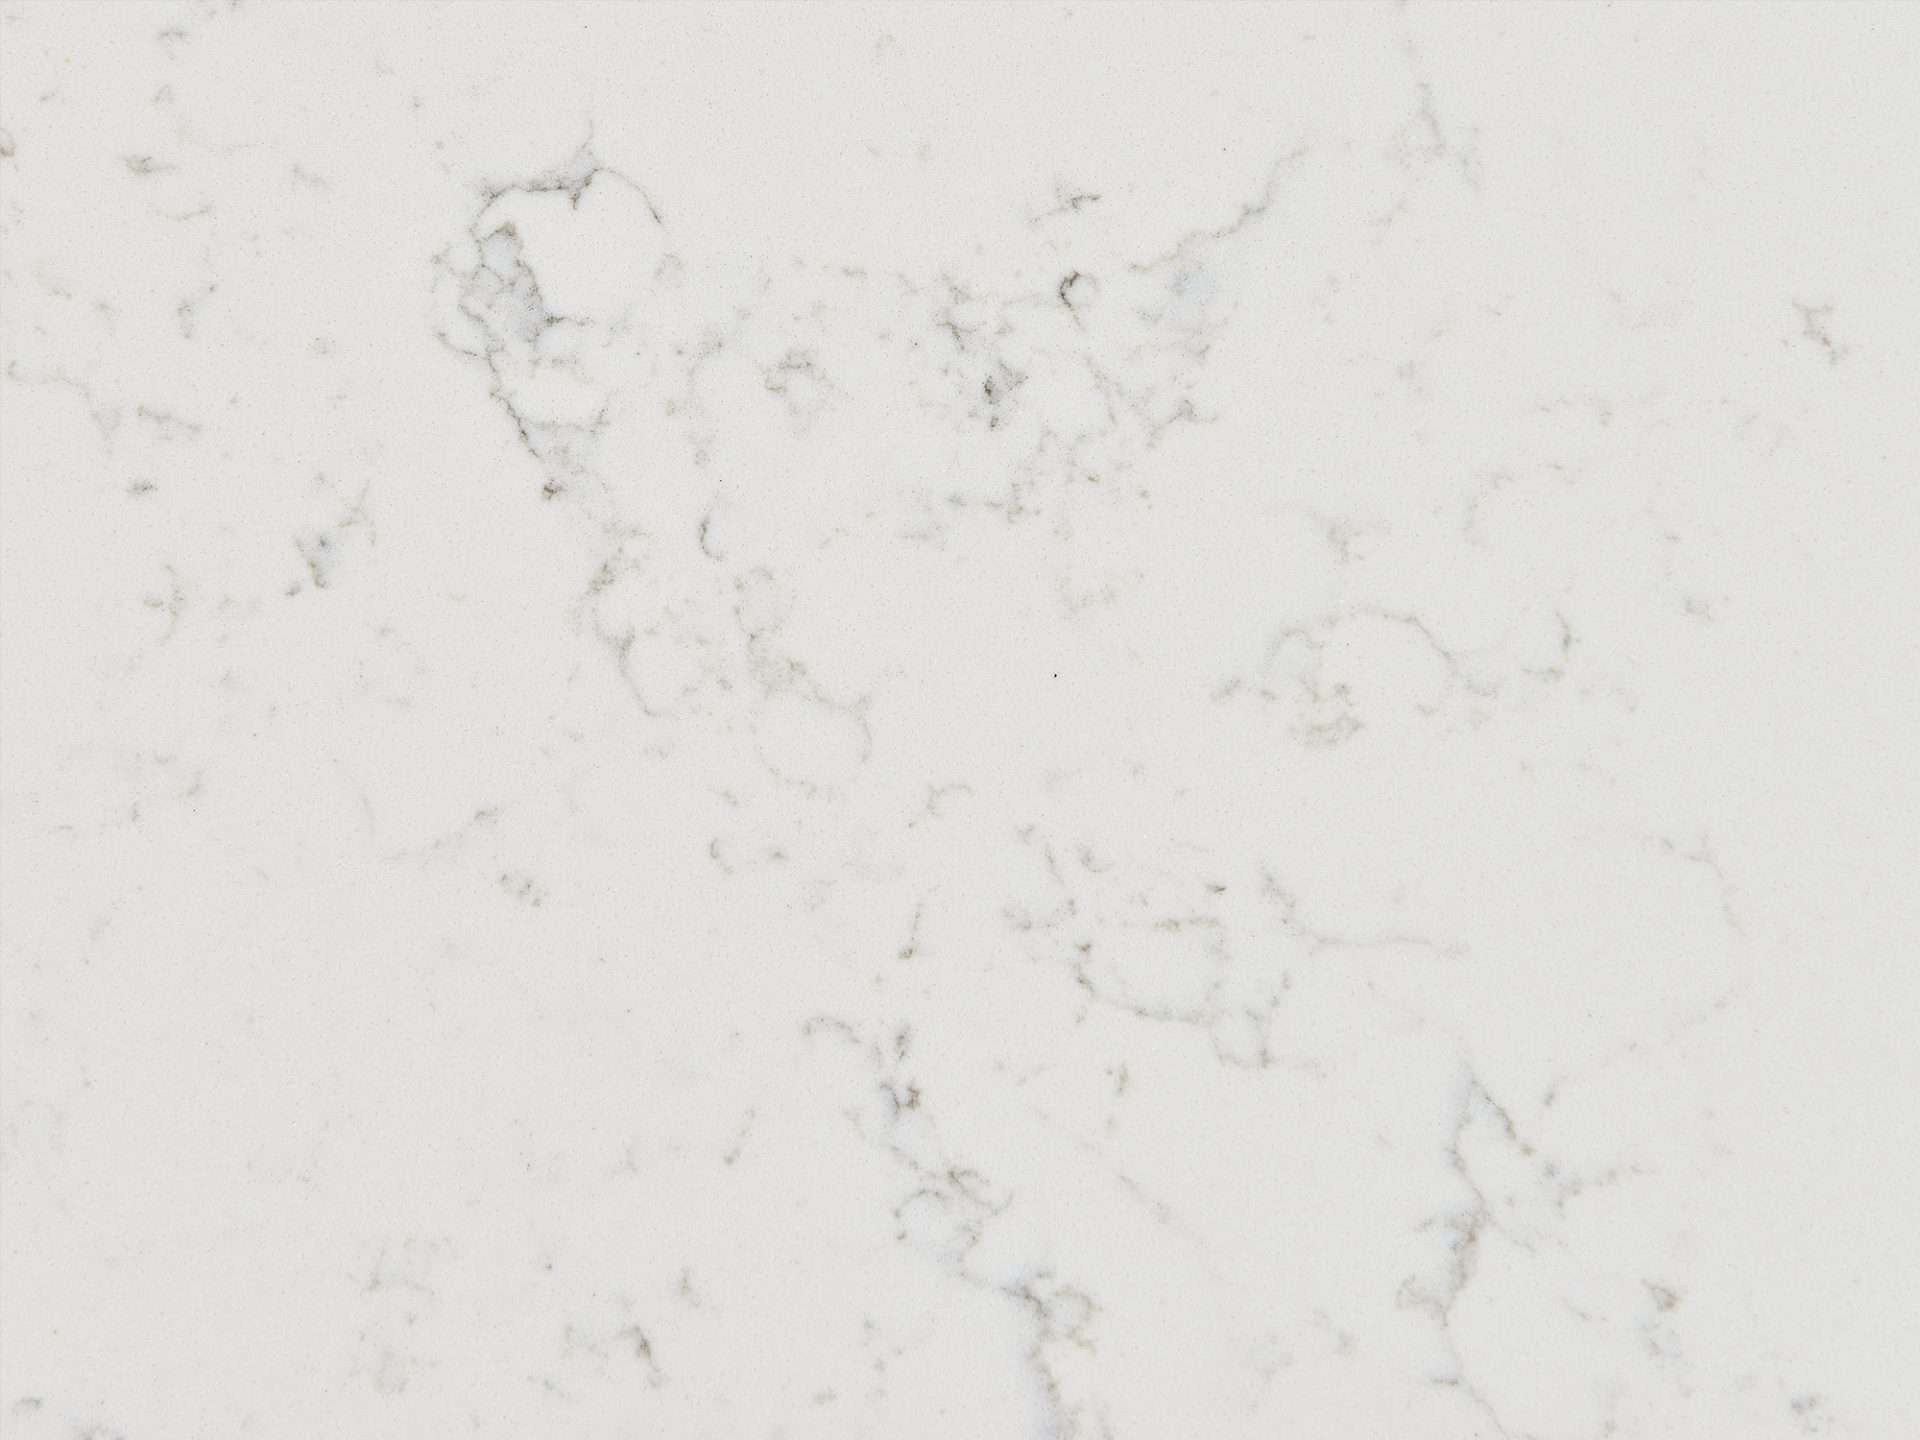 Upgrade your residential or commercial space with premium Meva granite, quartz, and marble kitchen countertop renovation services, perfect for your vanity, fireplace, and bath remodel needs. kasa k7709 Care and Maintenance: Non-Porous Surface: Easy to clean and maintain. Heat Resistance: Can withstand high temperatures without damage. Scratch Resistance: Resistant to scratches and daily wear. Cleaning: Use mild detergent and lukewarm water for cleaning. Avoid Harsh Cleaners: Do not use abrasive or harsh cleaners. Technical Information: Model Thickness: Available in 20mm and 30mm thickness (for selective locations). Model Finishes: Comes in a polished . Model Size: Available in two sizes - 63” x 126” (160 cm x 320 cm).